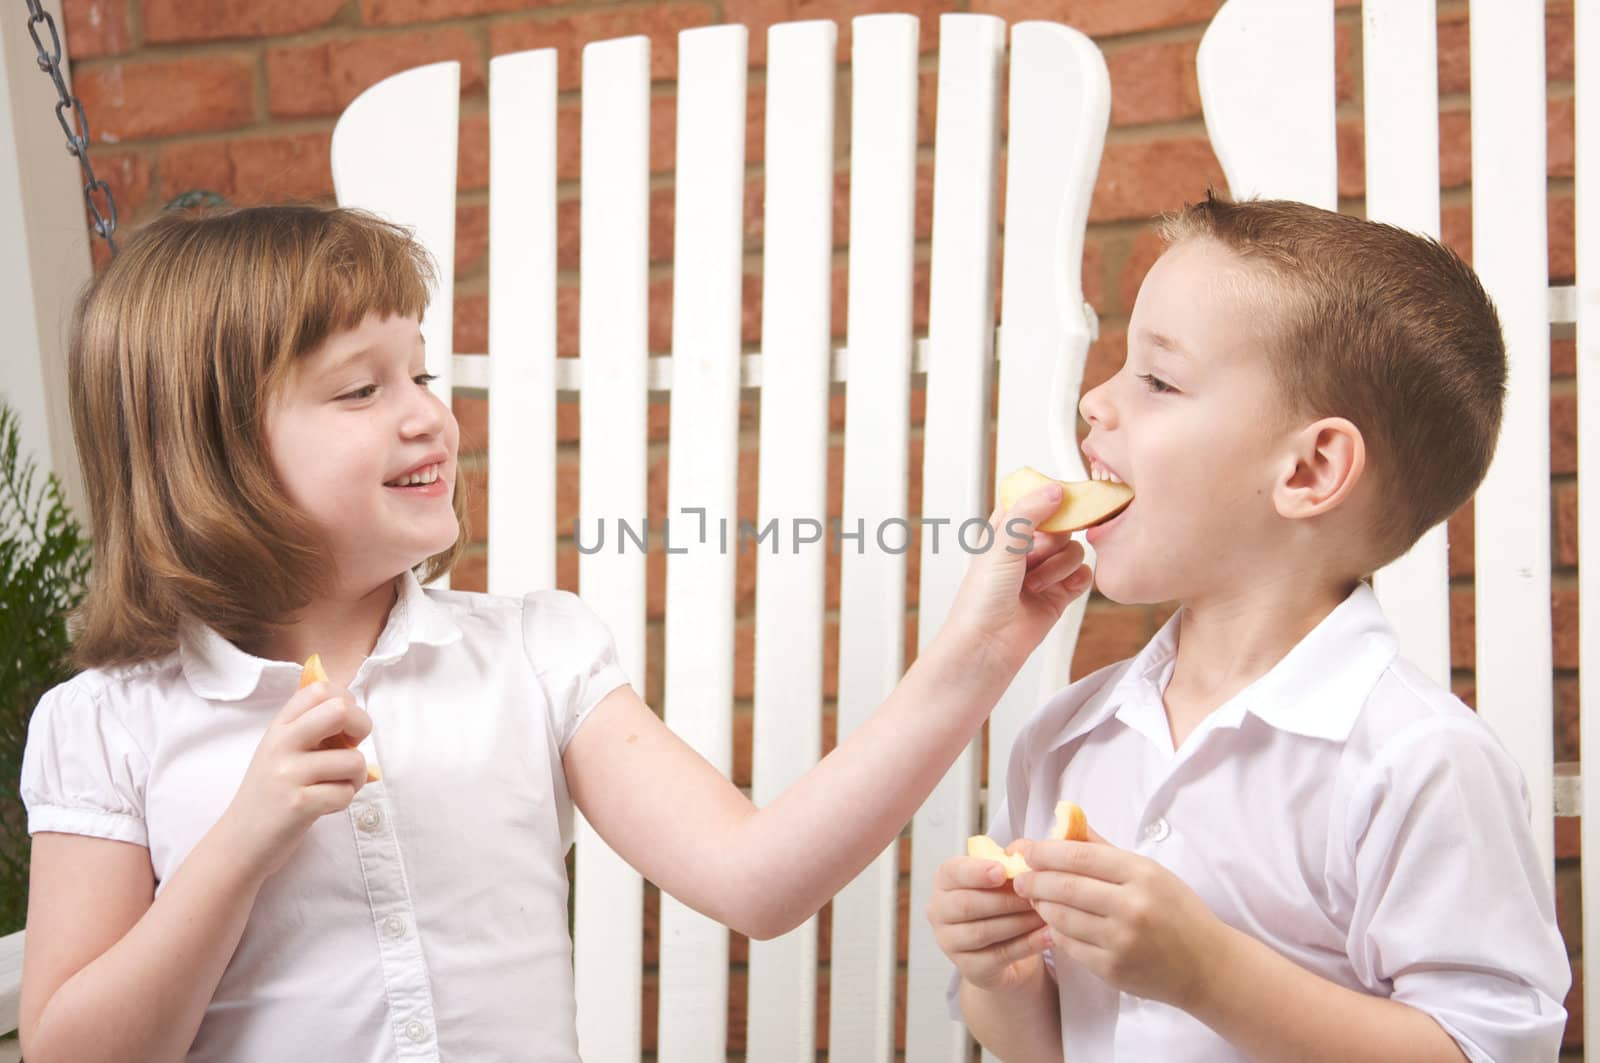 Sister and Brother Eating an Apple by Feverpitched